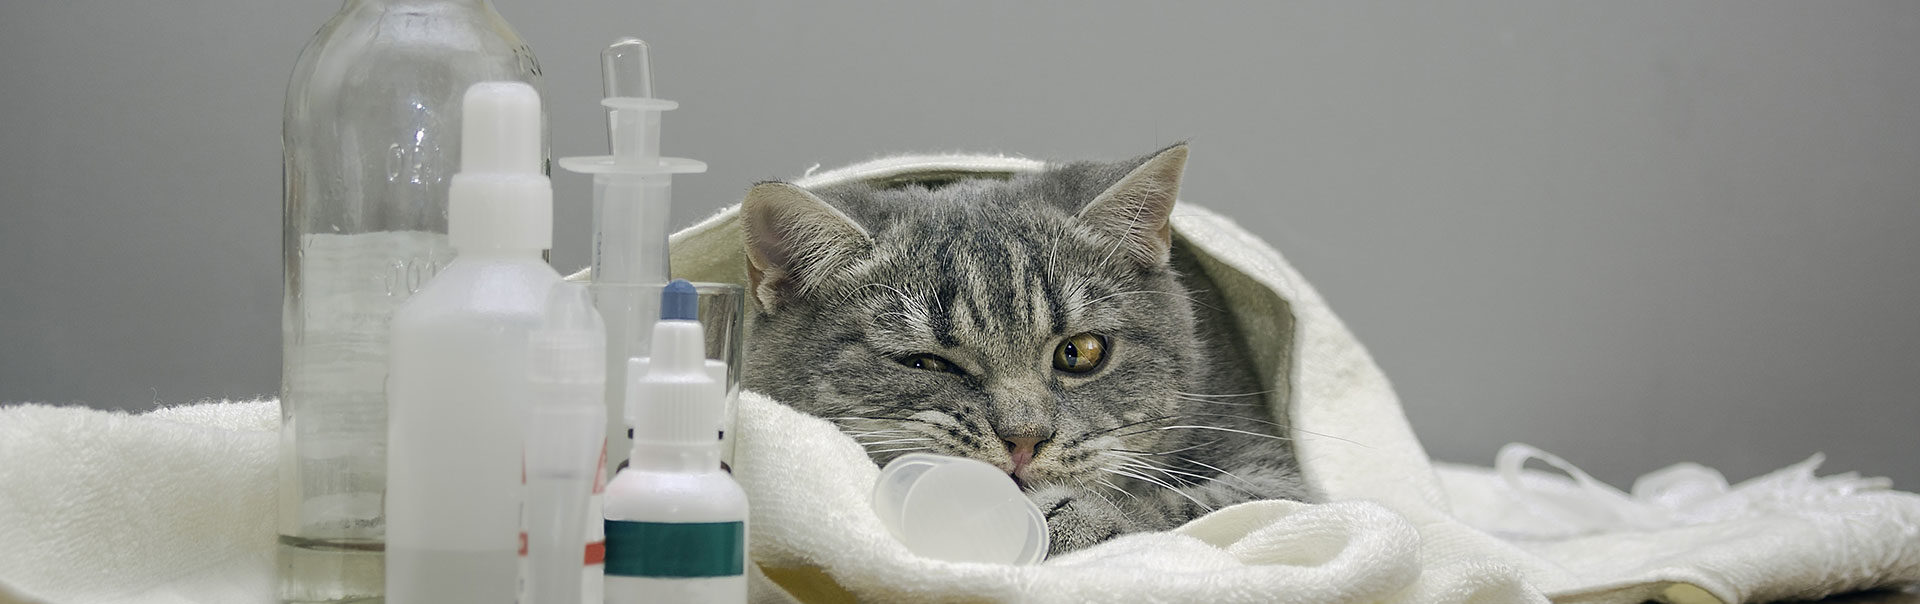 Cat covered in a towel and lying down next to a syringe and containers